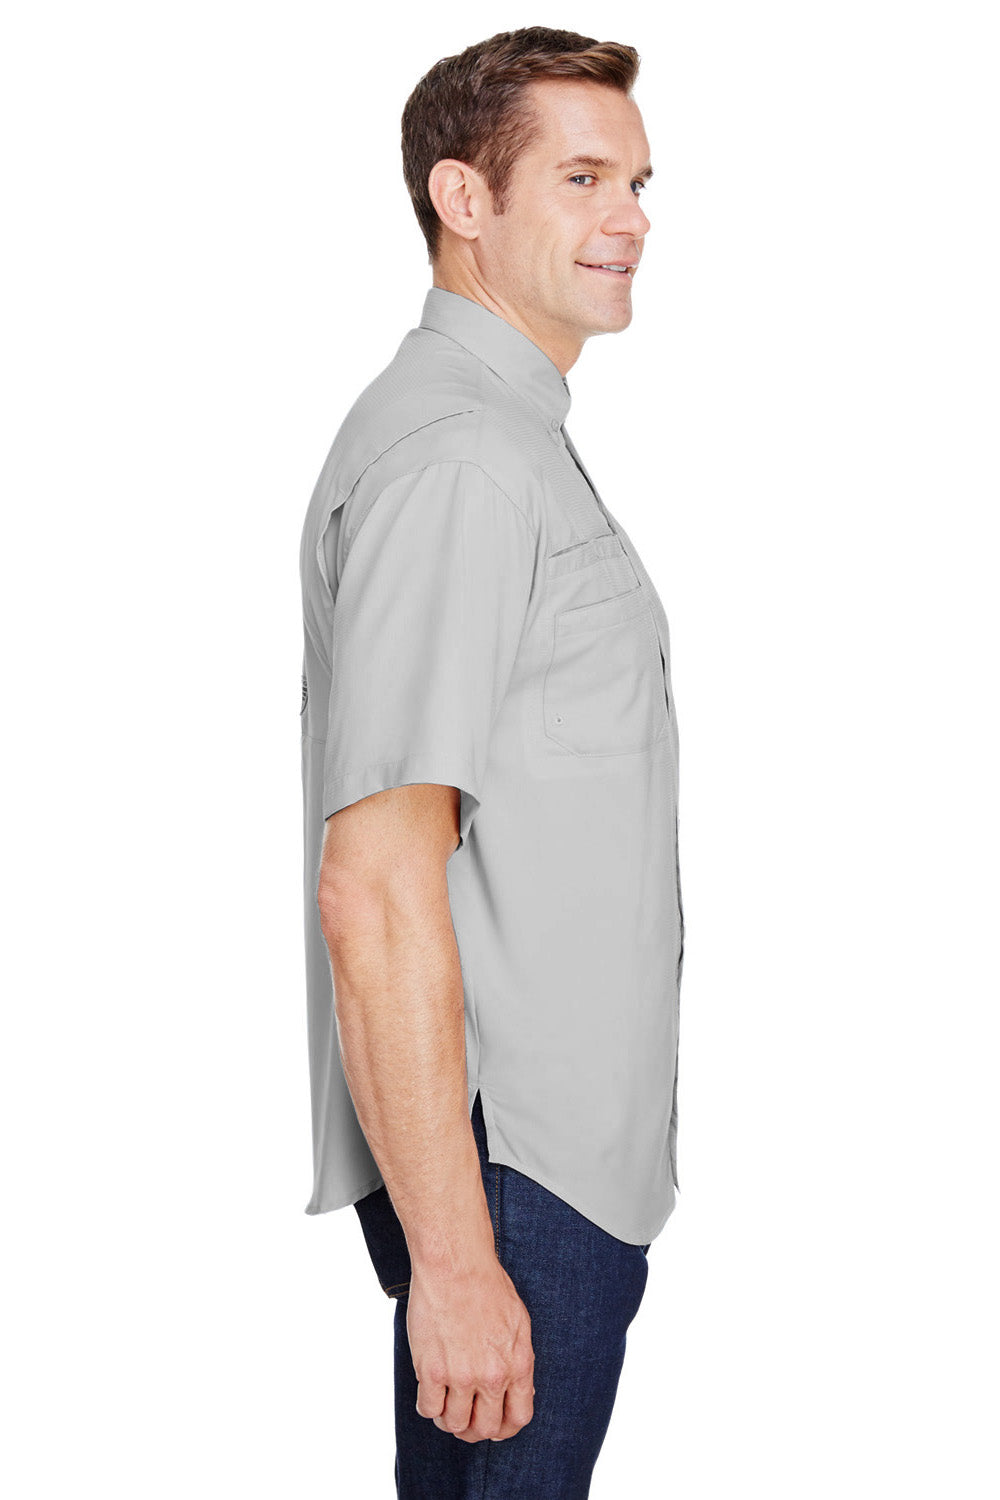 Columbia 7266 Tamiami II Moisture Wicking Short Sleeve Button Down Shirt w/ Double Pockets Cool Grey Side